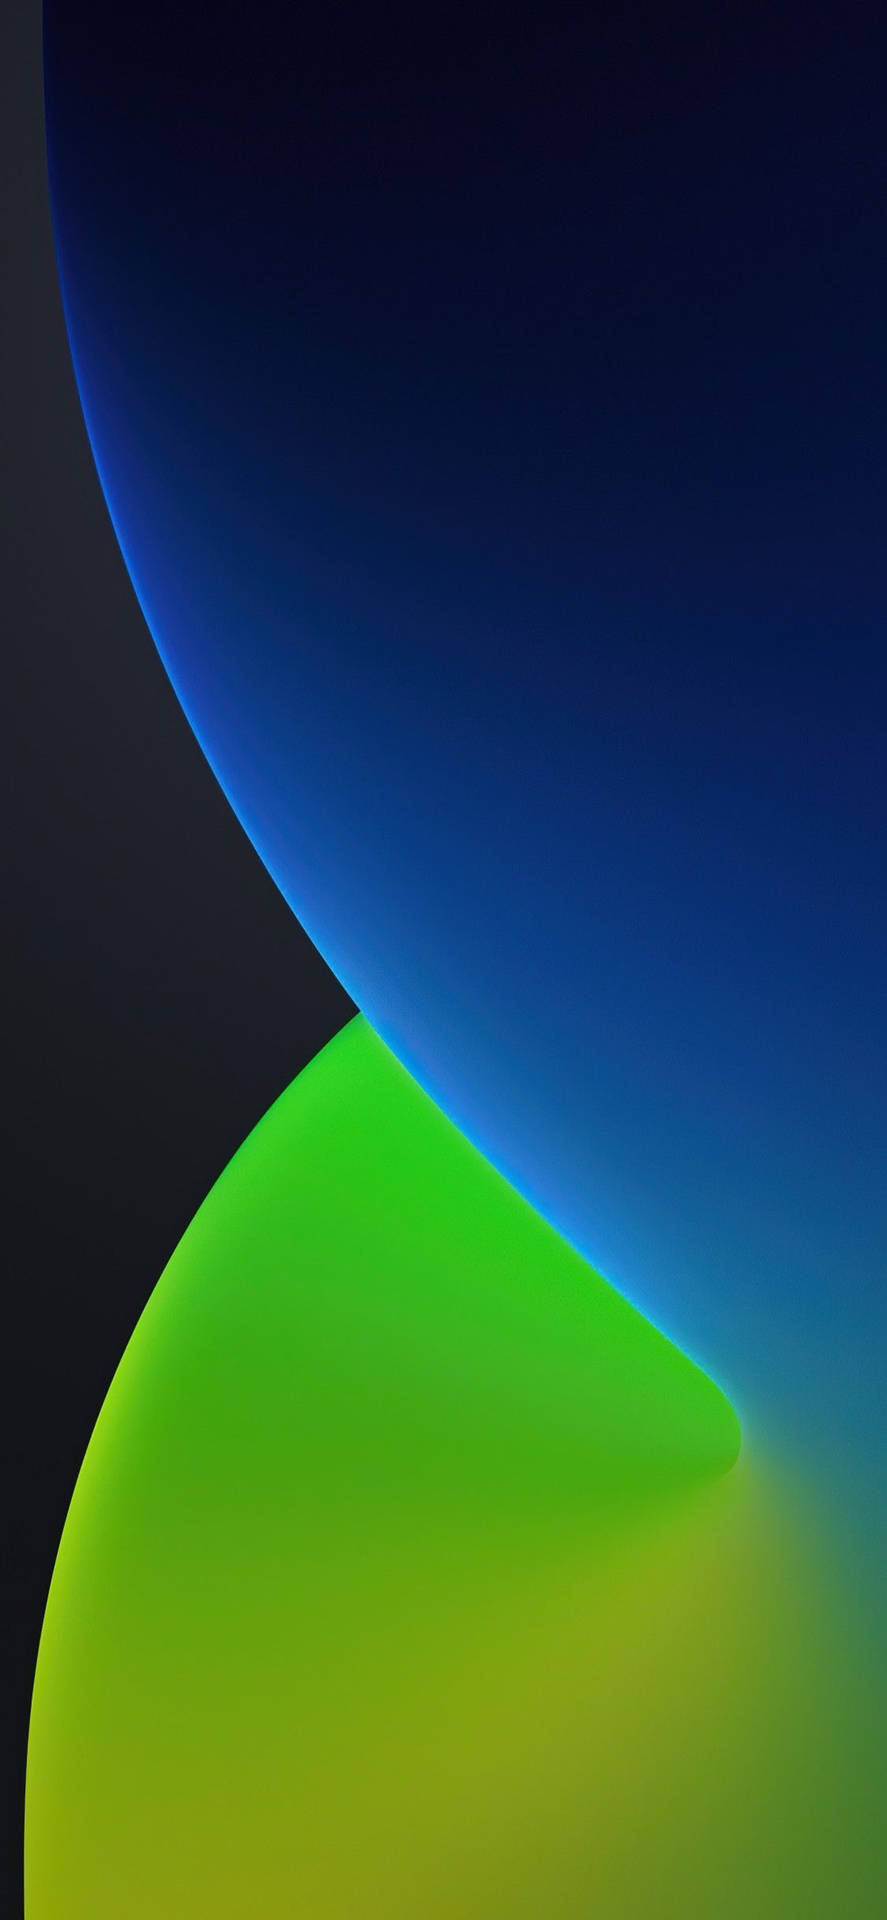 Blue And Green Circle Overlapping Ios 12 Wallpaper